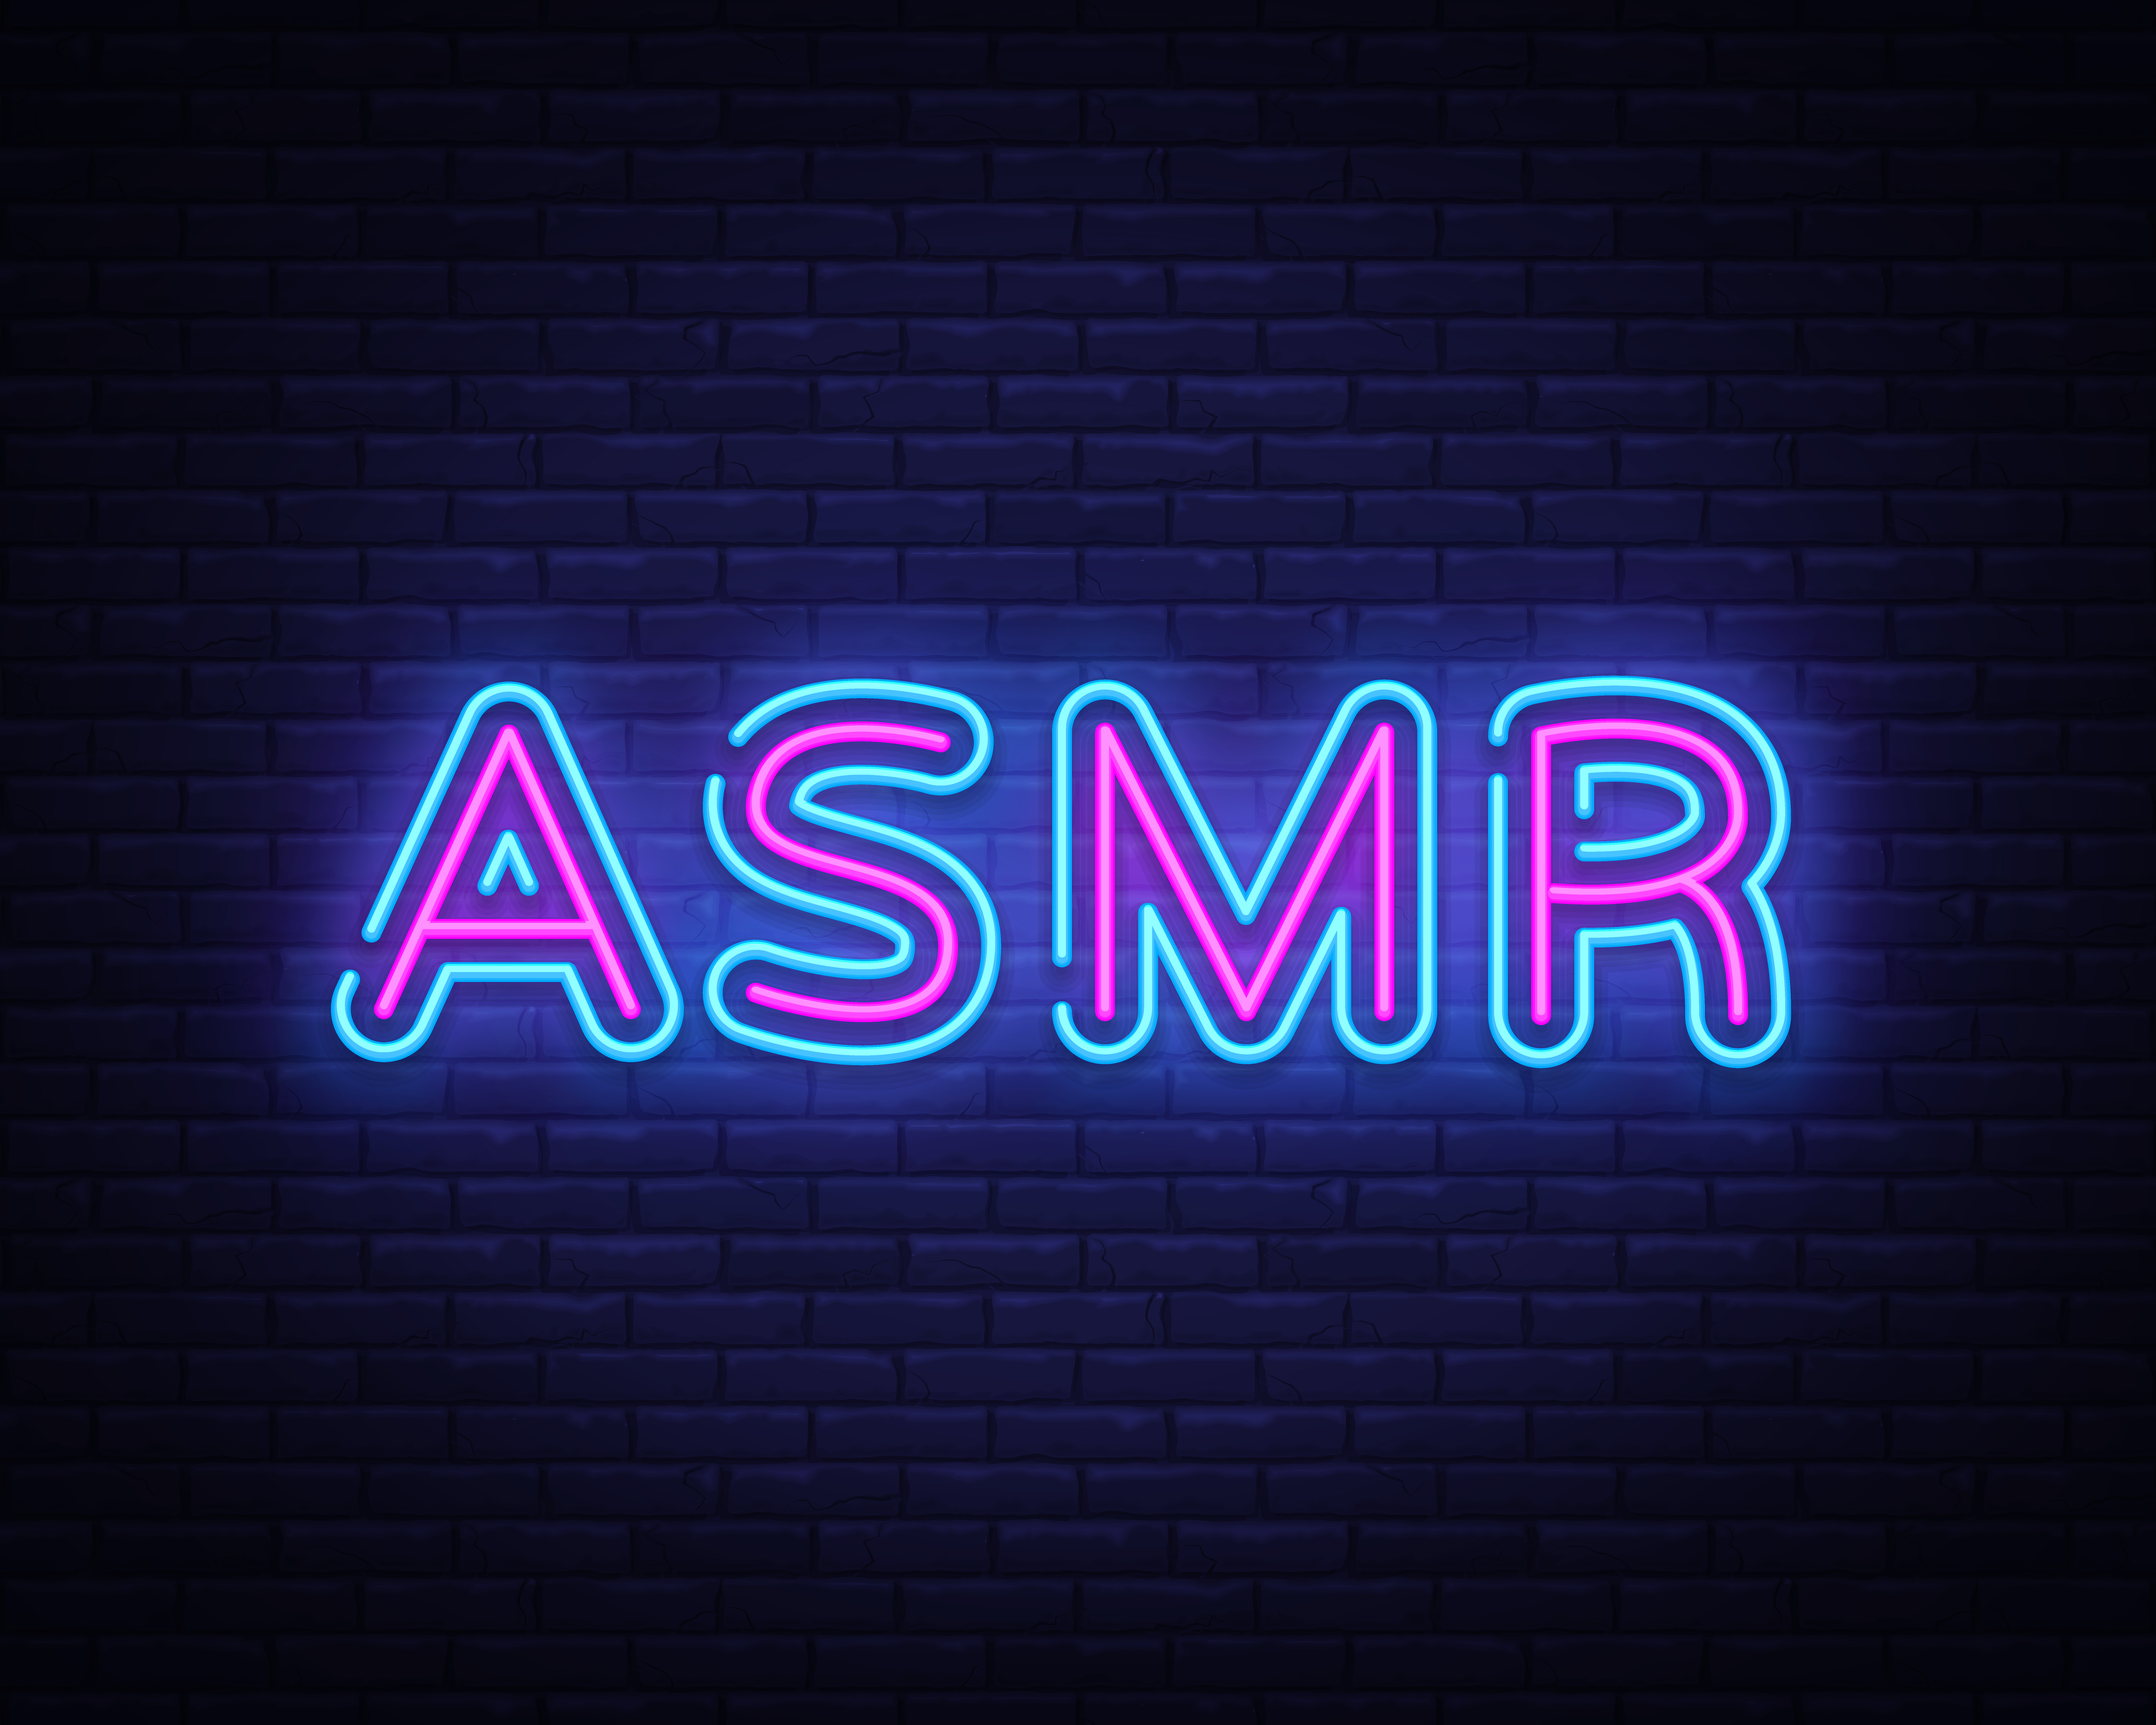 ASMR, explained: why millions of people are watching 